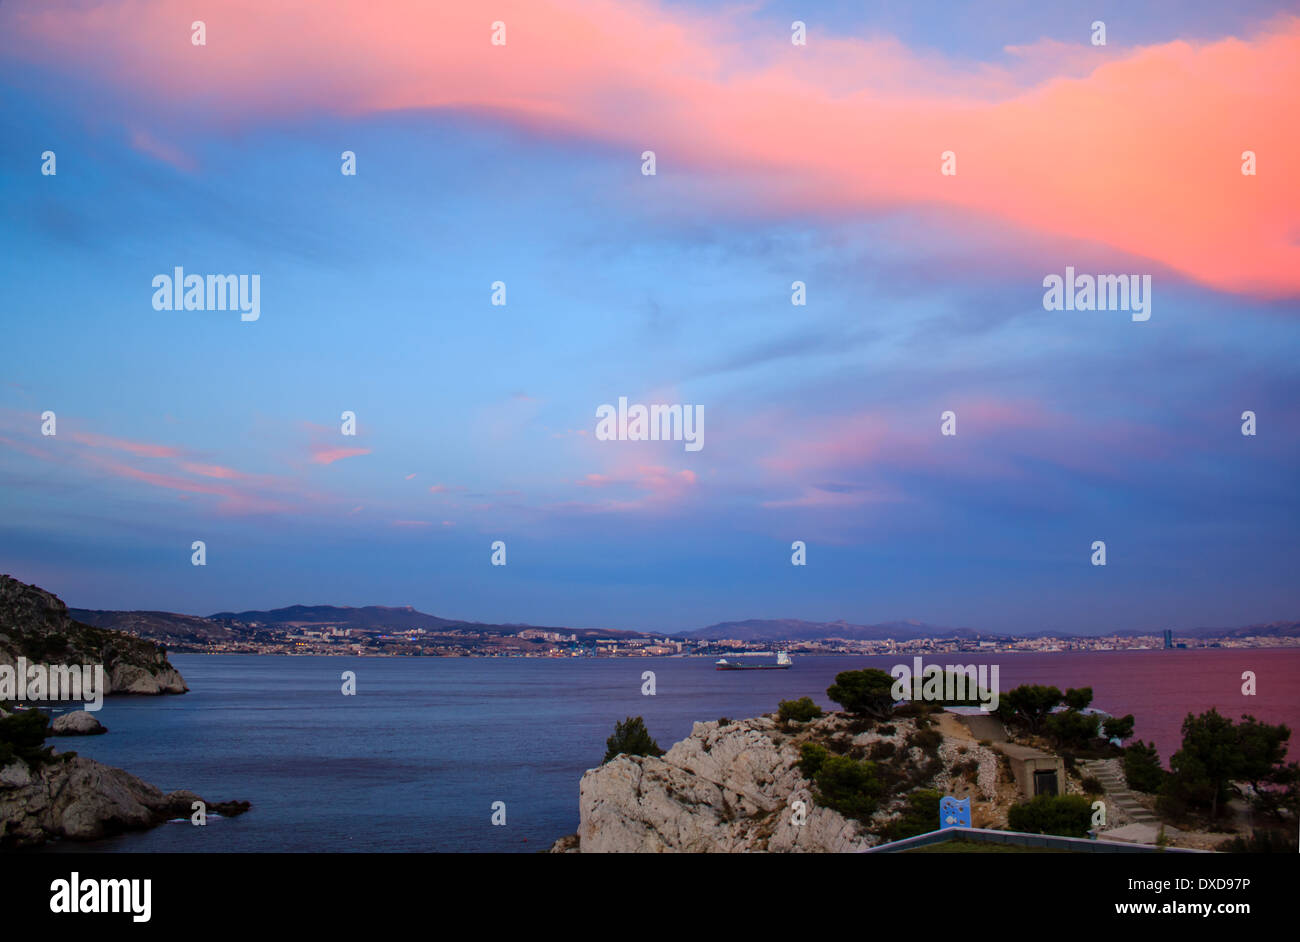 View at the sea by sunset in Niolon, small town near Marseilles in France. Place is called as well The Blue Coast calanques. Stock Photo